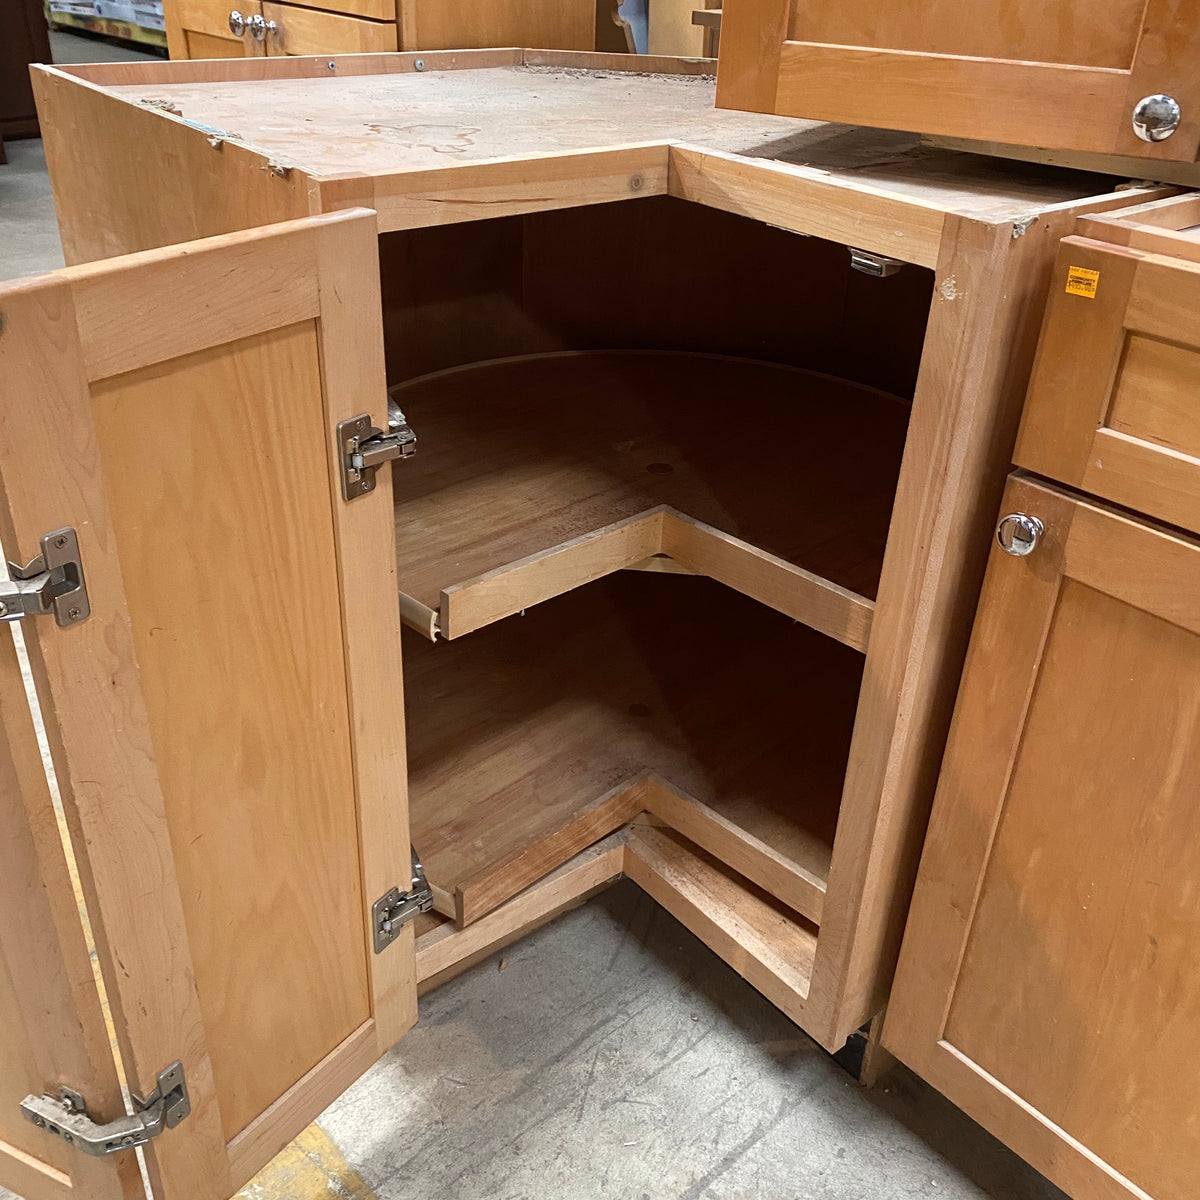 What are Shaker-style cabinets? - KraftMaid